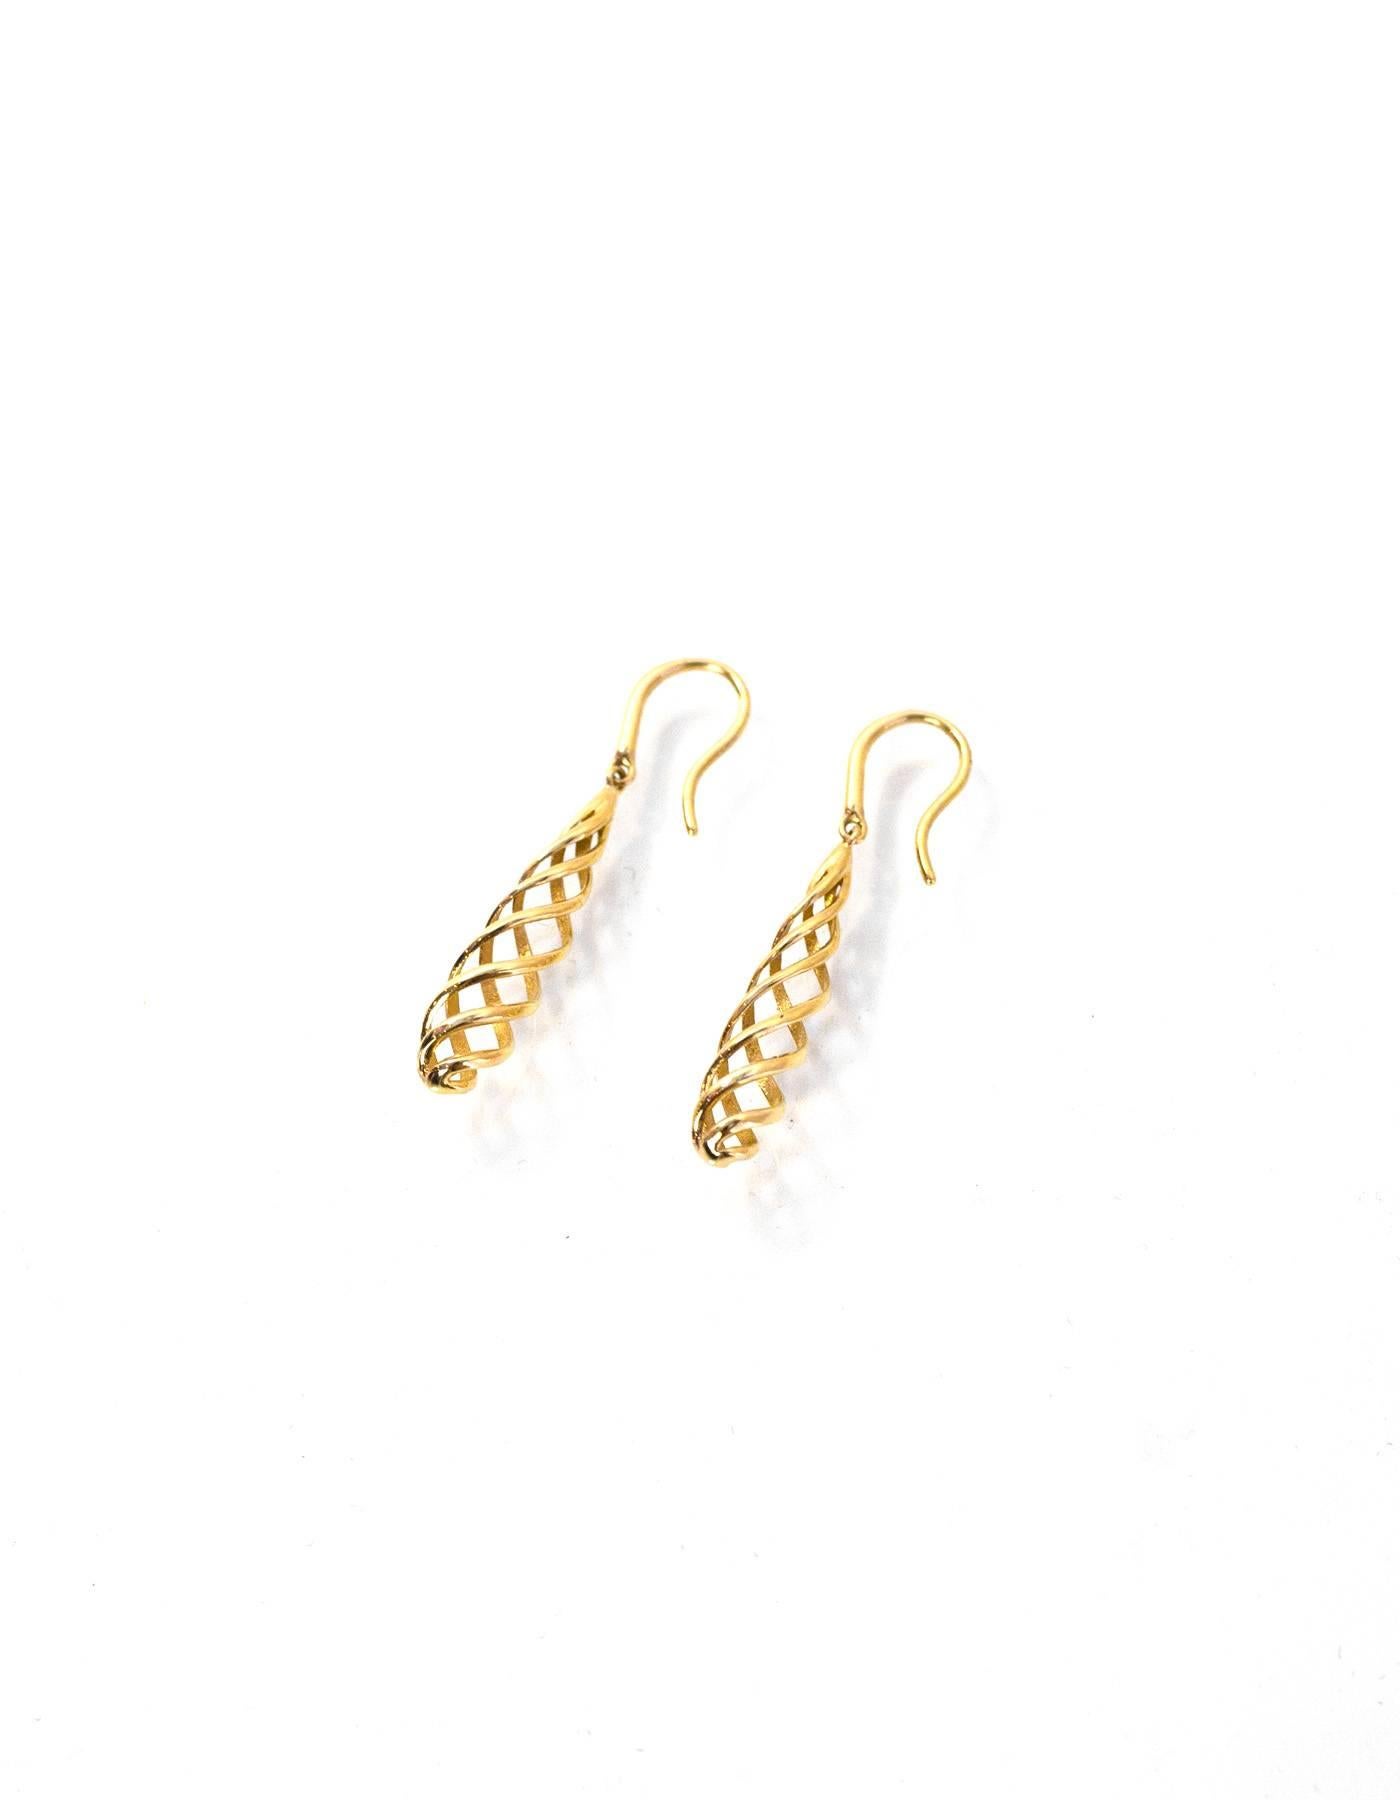 Tiffany & Co. 18k Gold Venezia Luce Drop Earrings
Earrings designed from Paloma Picasso collection

Made In: Italy
Color: Gold
Materials: 18k Gold
Closure: Hook back for pierced ears
Stamp: Paloma Picasso T&Co. 750 Italy
Retail Price: $1,250